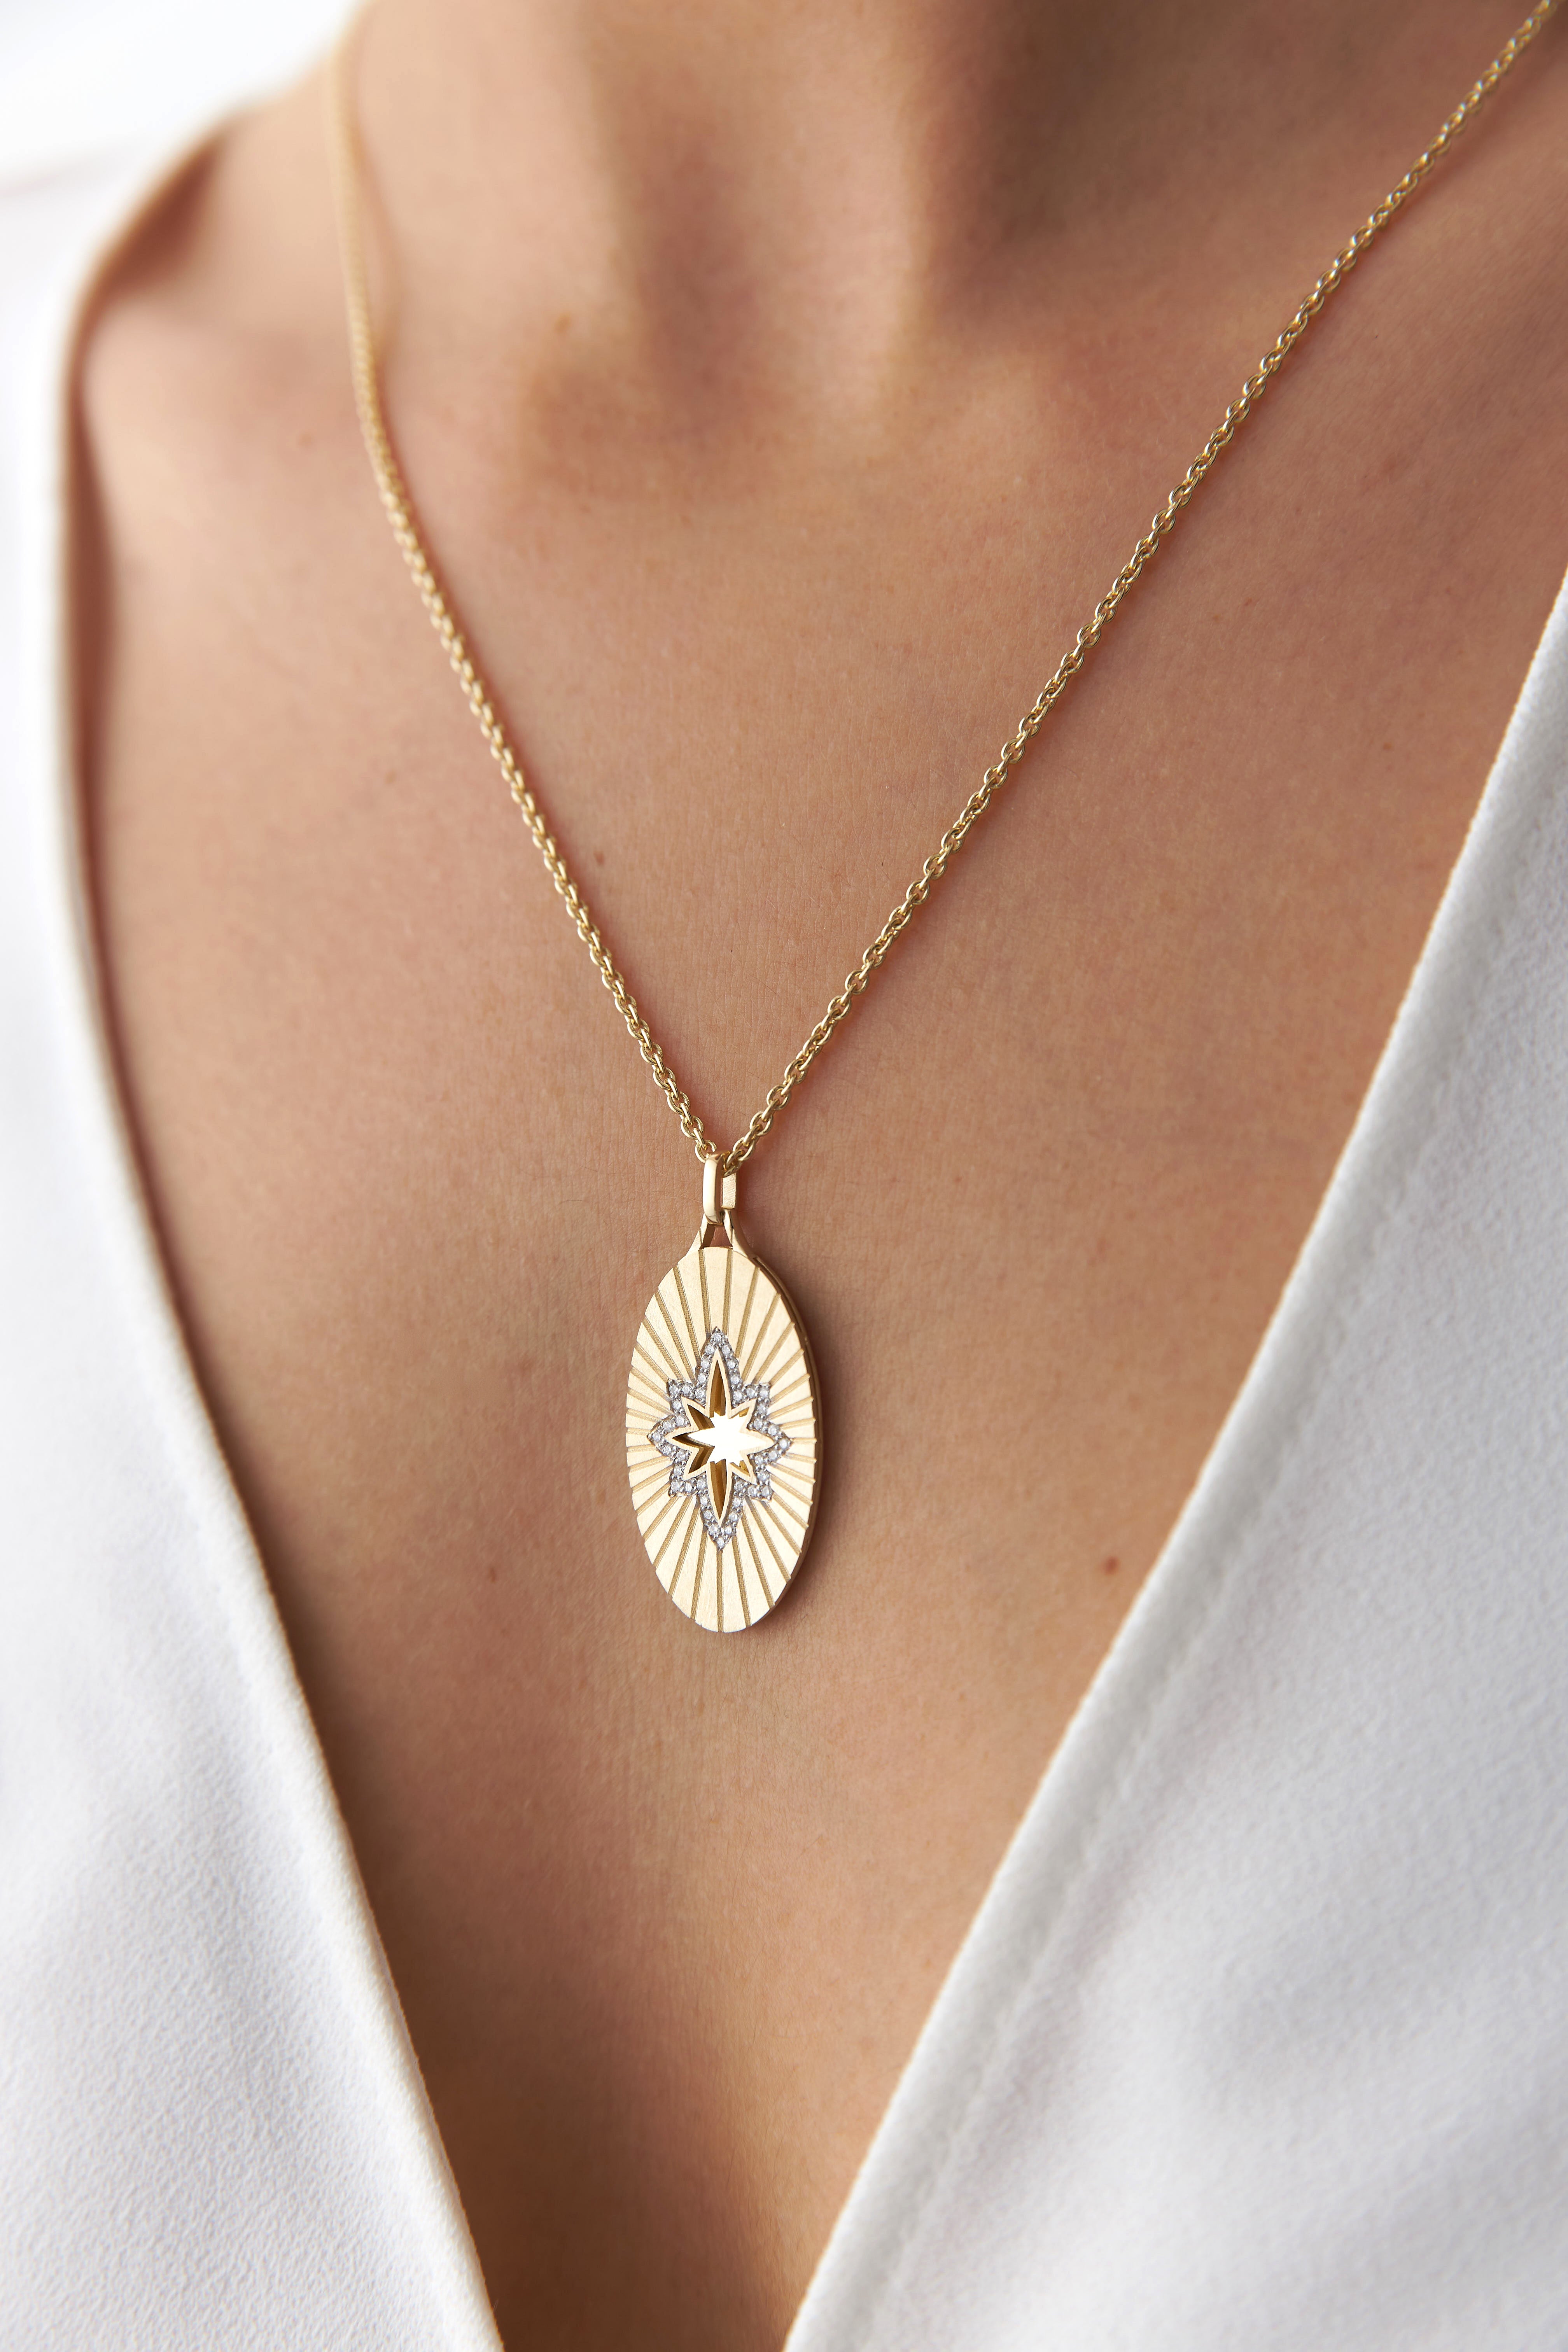 Large Diamond North Star Necklace in 14K Gold